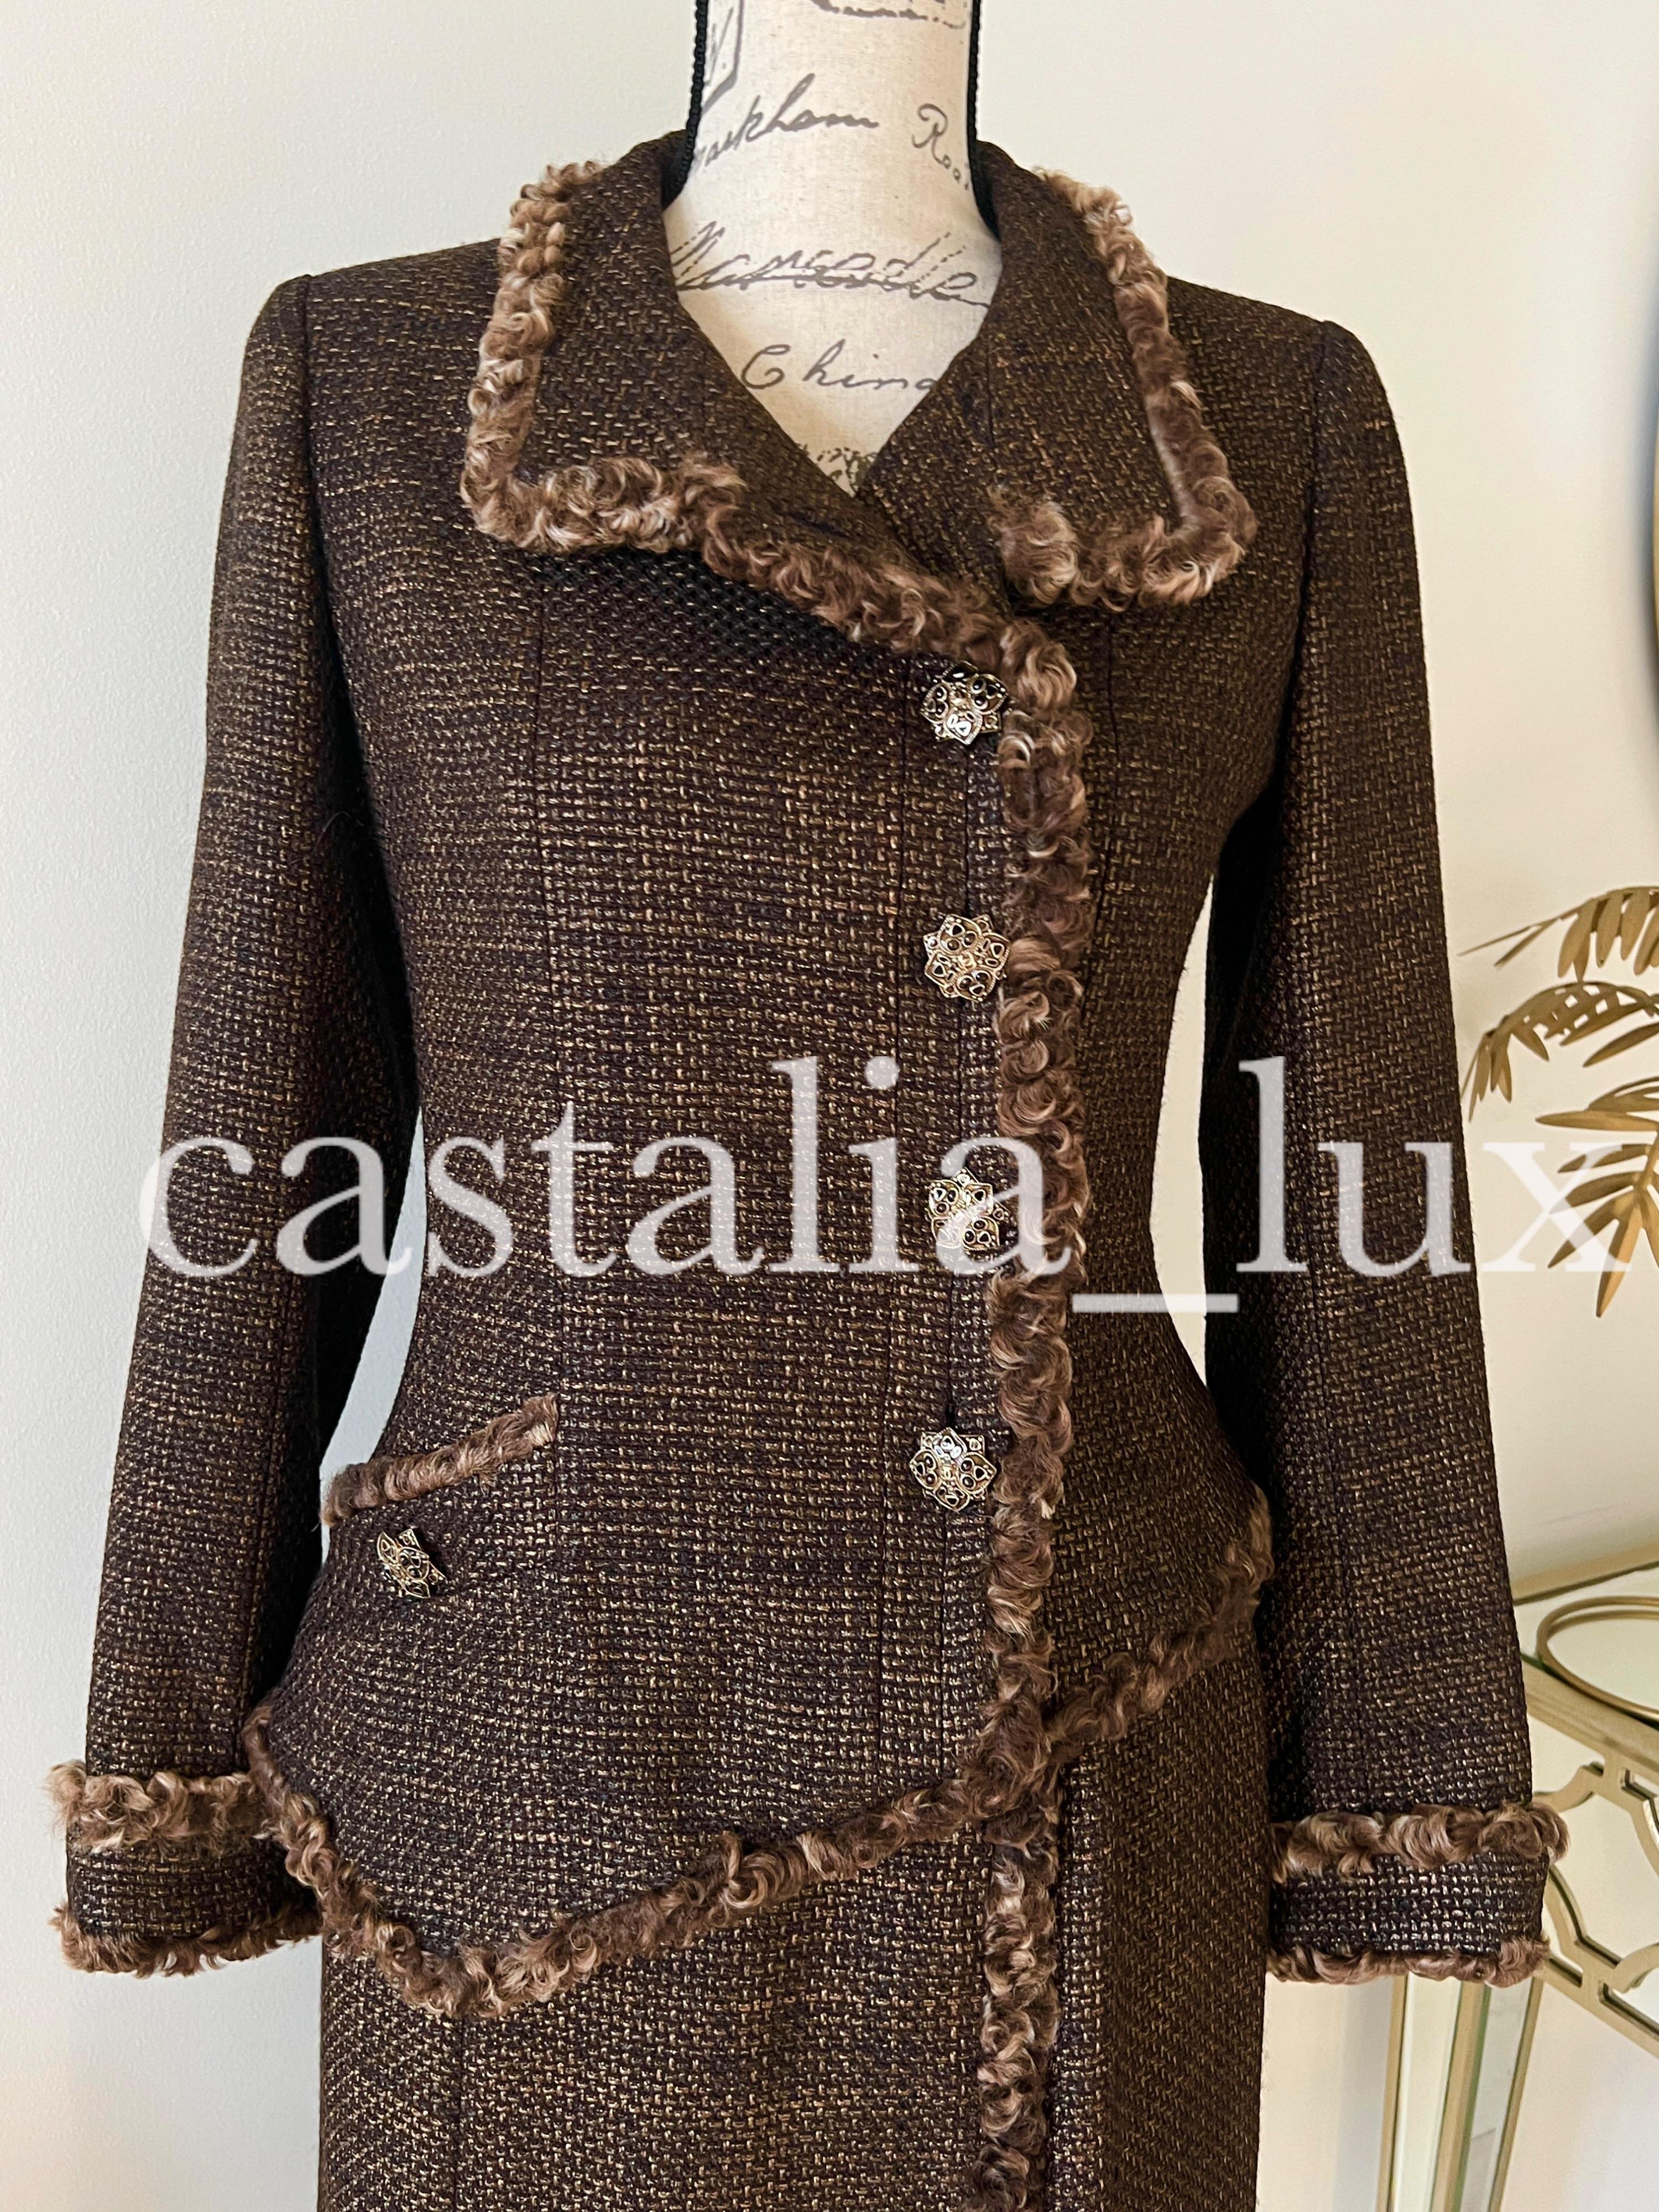 New, Extremely rare Chanel chocolate brown suit ( jacket and skirt) made of precious Lesage tweed. 
- stunning CC logo jewel Gripoix buttons
- precious lesage tweed with intricate bronze shimmer
- CC logo charm at skirt waist
- fully lined with